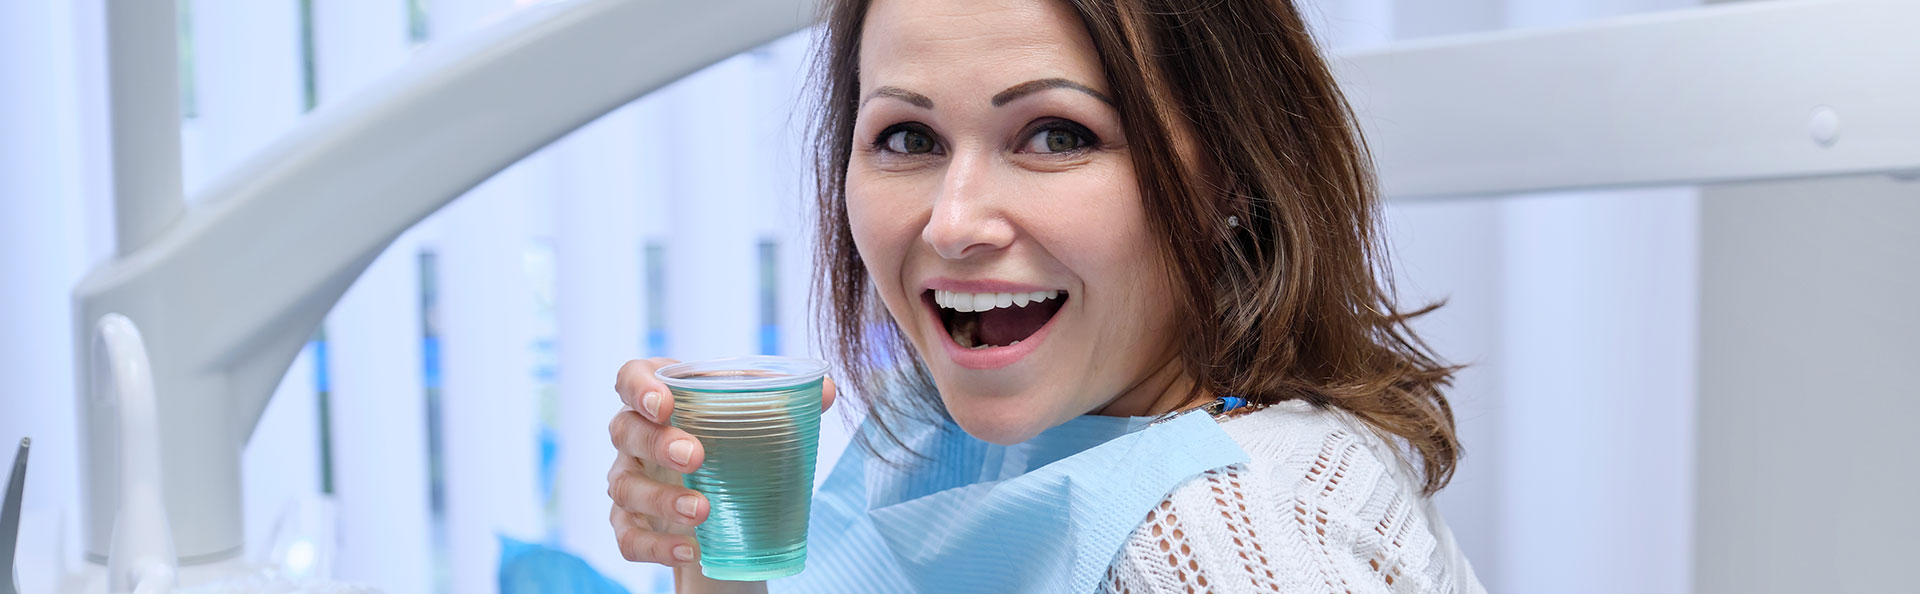 Beautiful woman smiling after oral hygiene maintenance